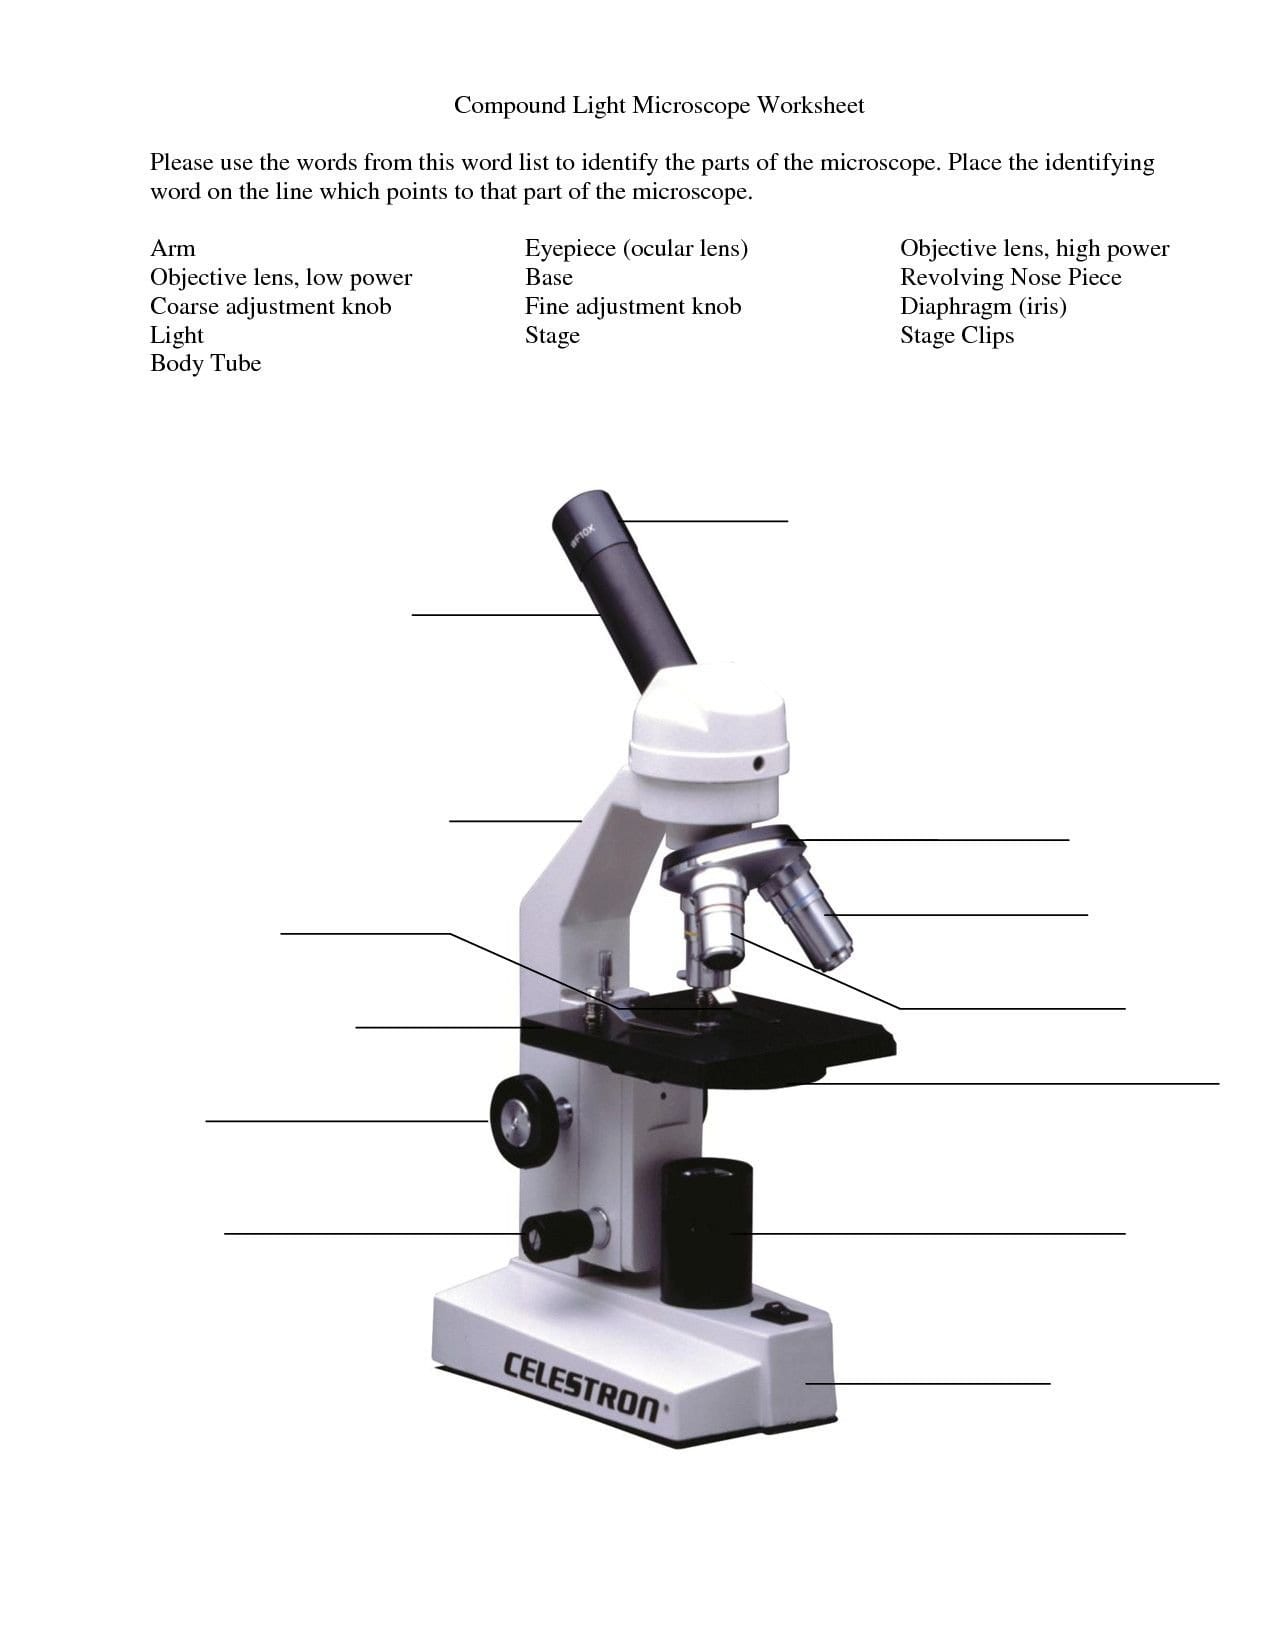 Microscope Parts And Use Worksheet Answers  Briefencounters Together With Microscope Parts And Use Worksheet